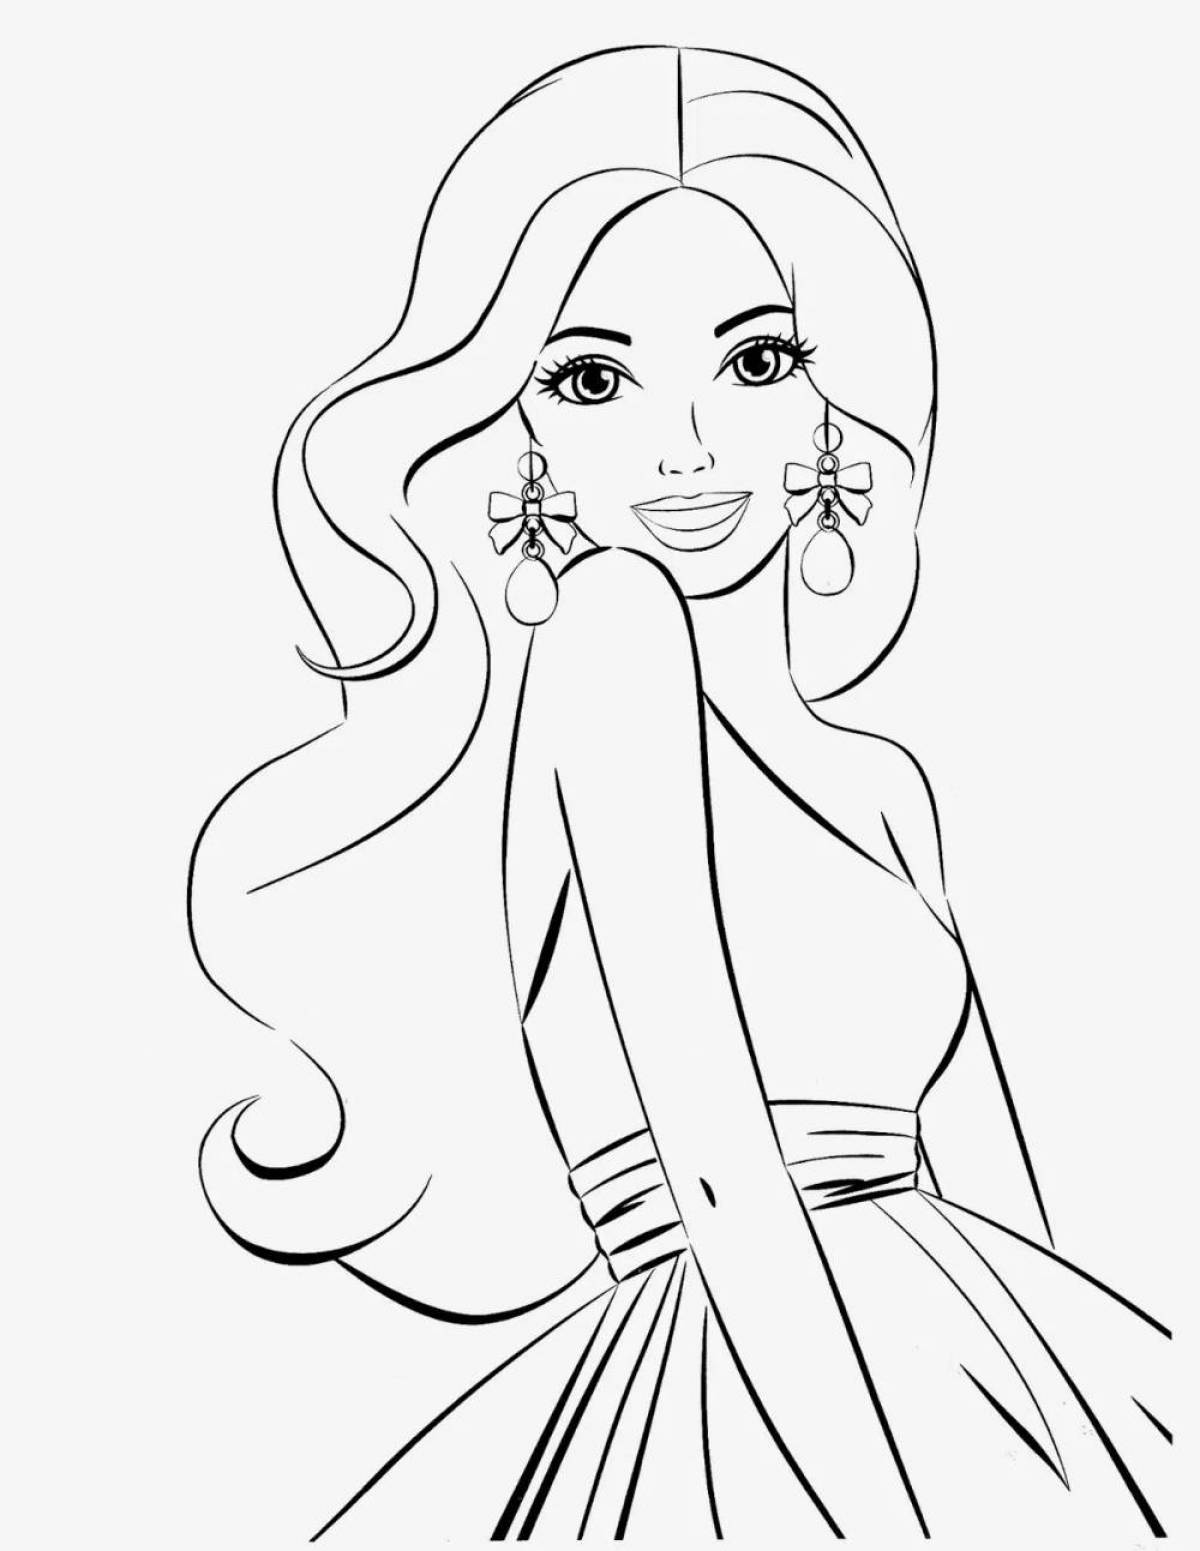 Barbie rainbow coloring page